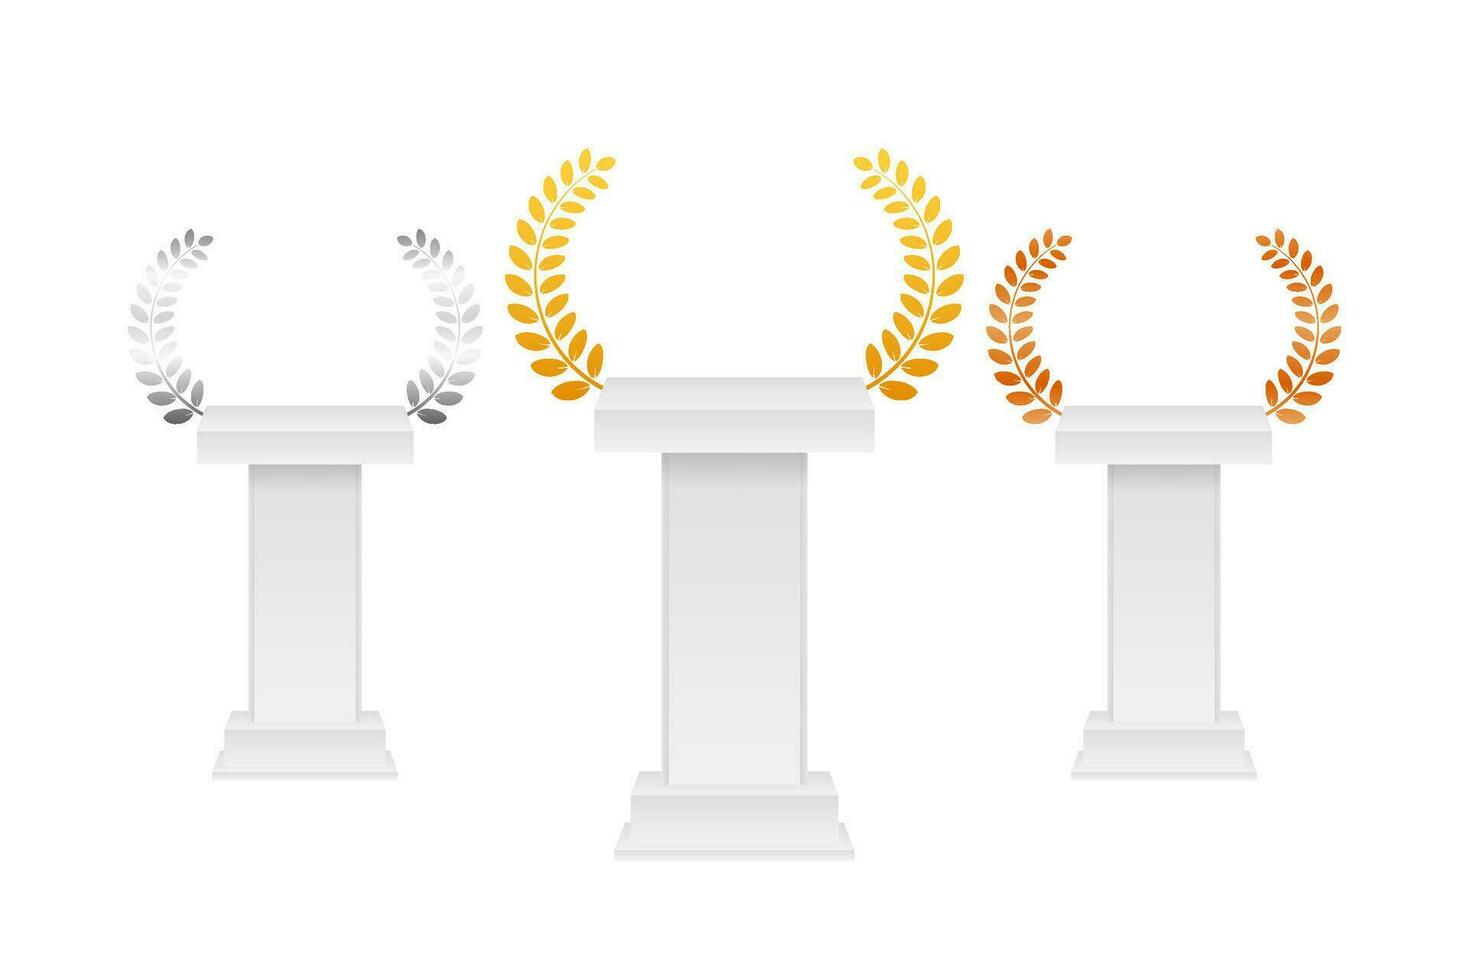 Gold, Silver, Bronze   First, Second and Third Places. Award laurel. Vector stock illustration